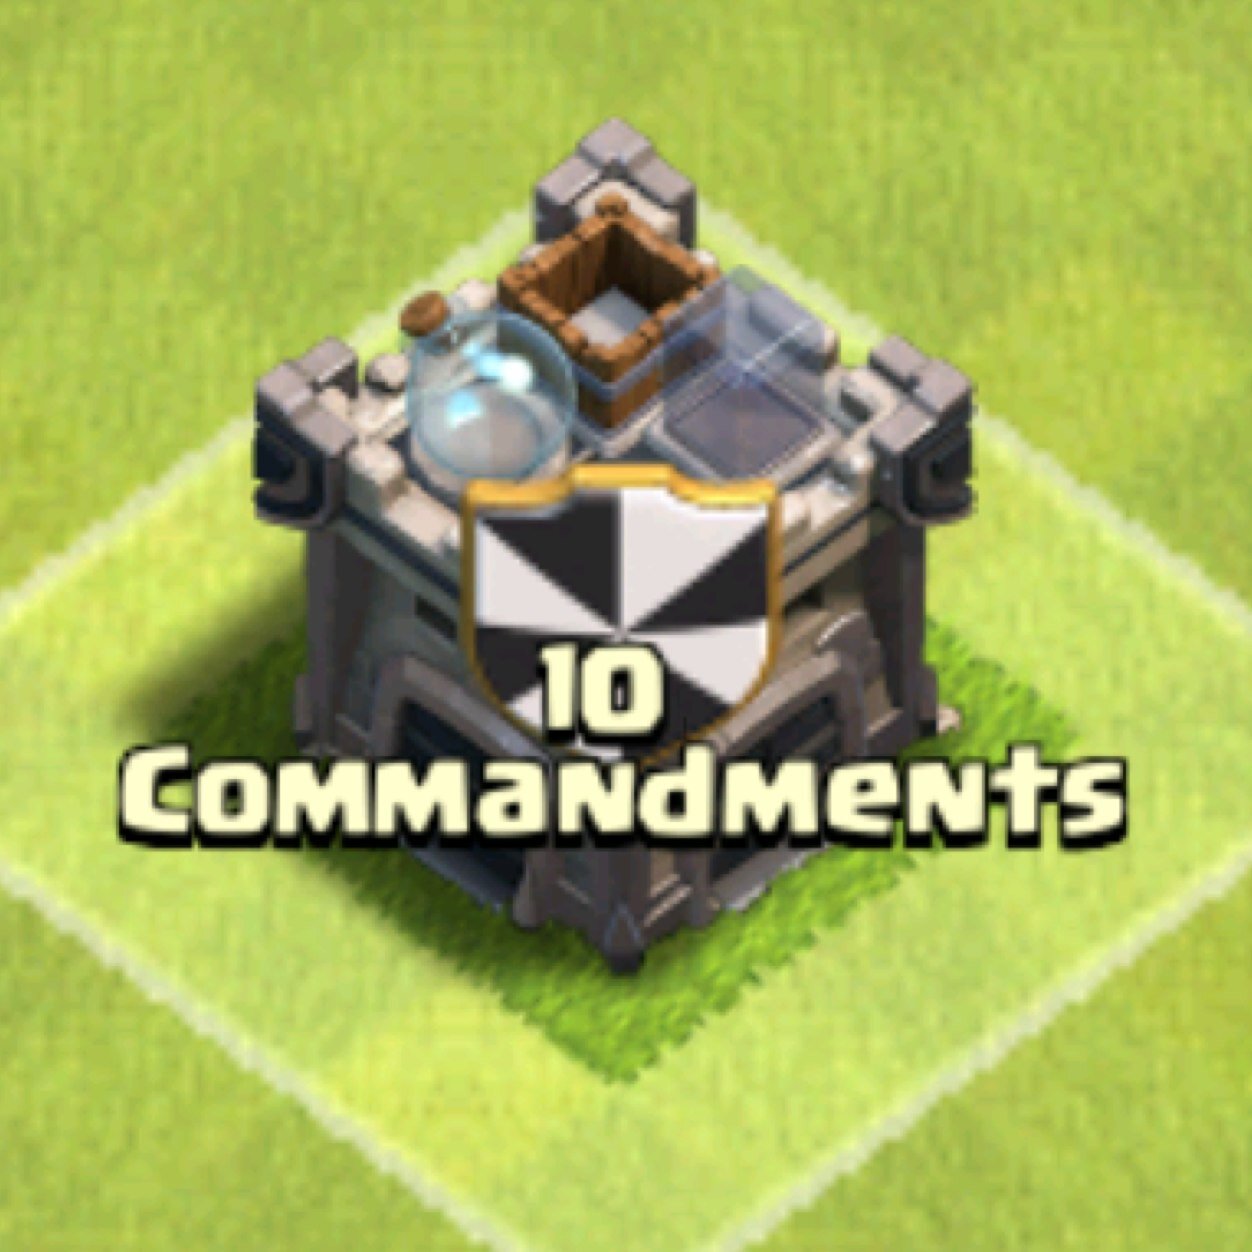 We live by the 10 Commandments of Clash! Join the WSR clan 10 Commandments! #WSRWarBros